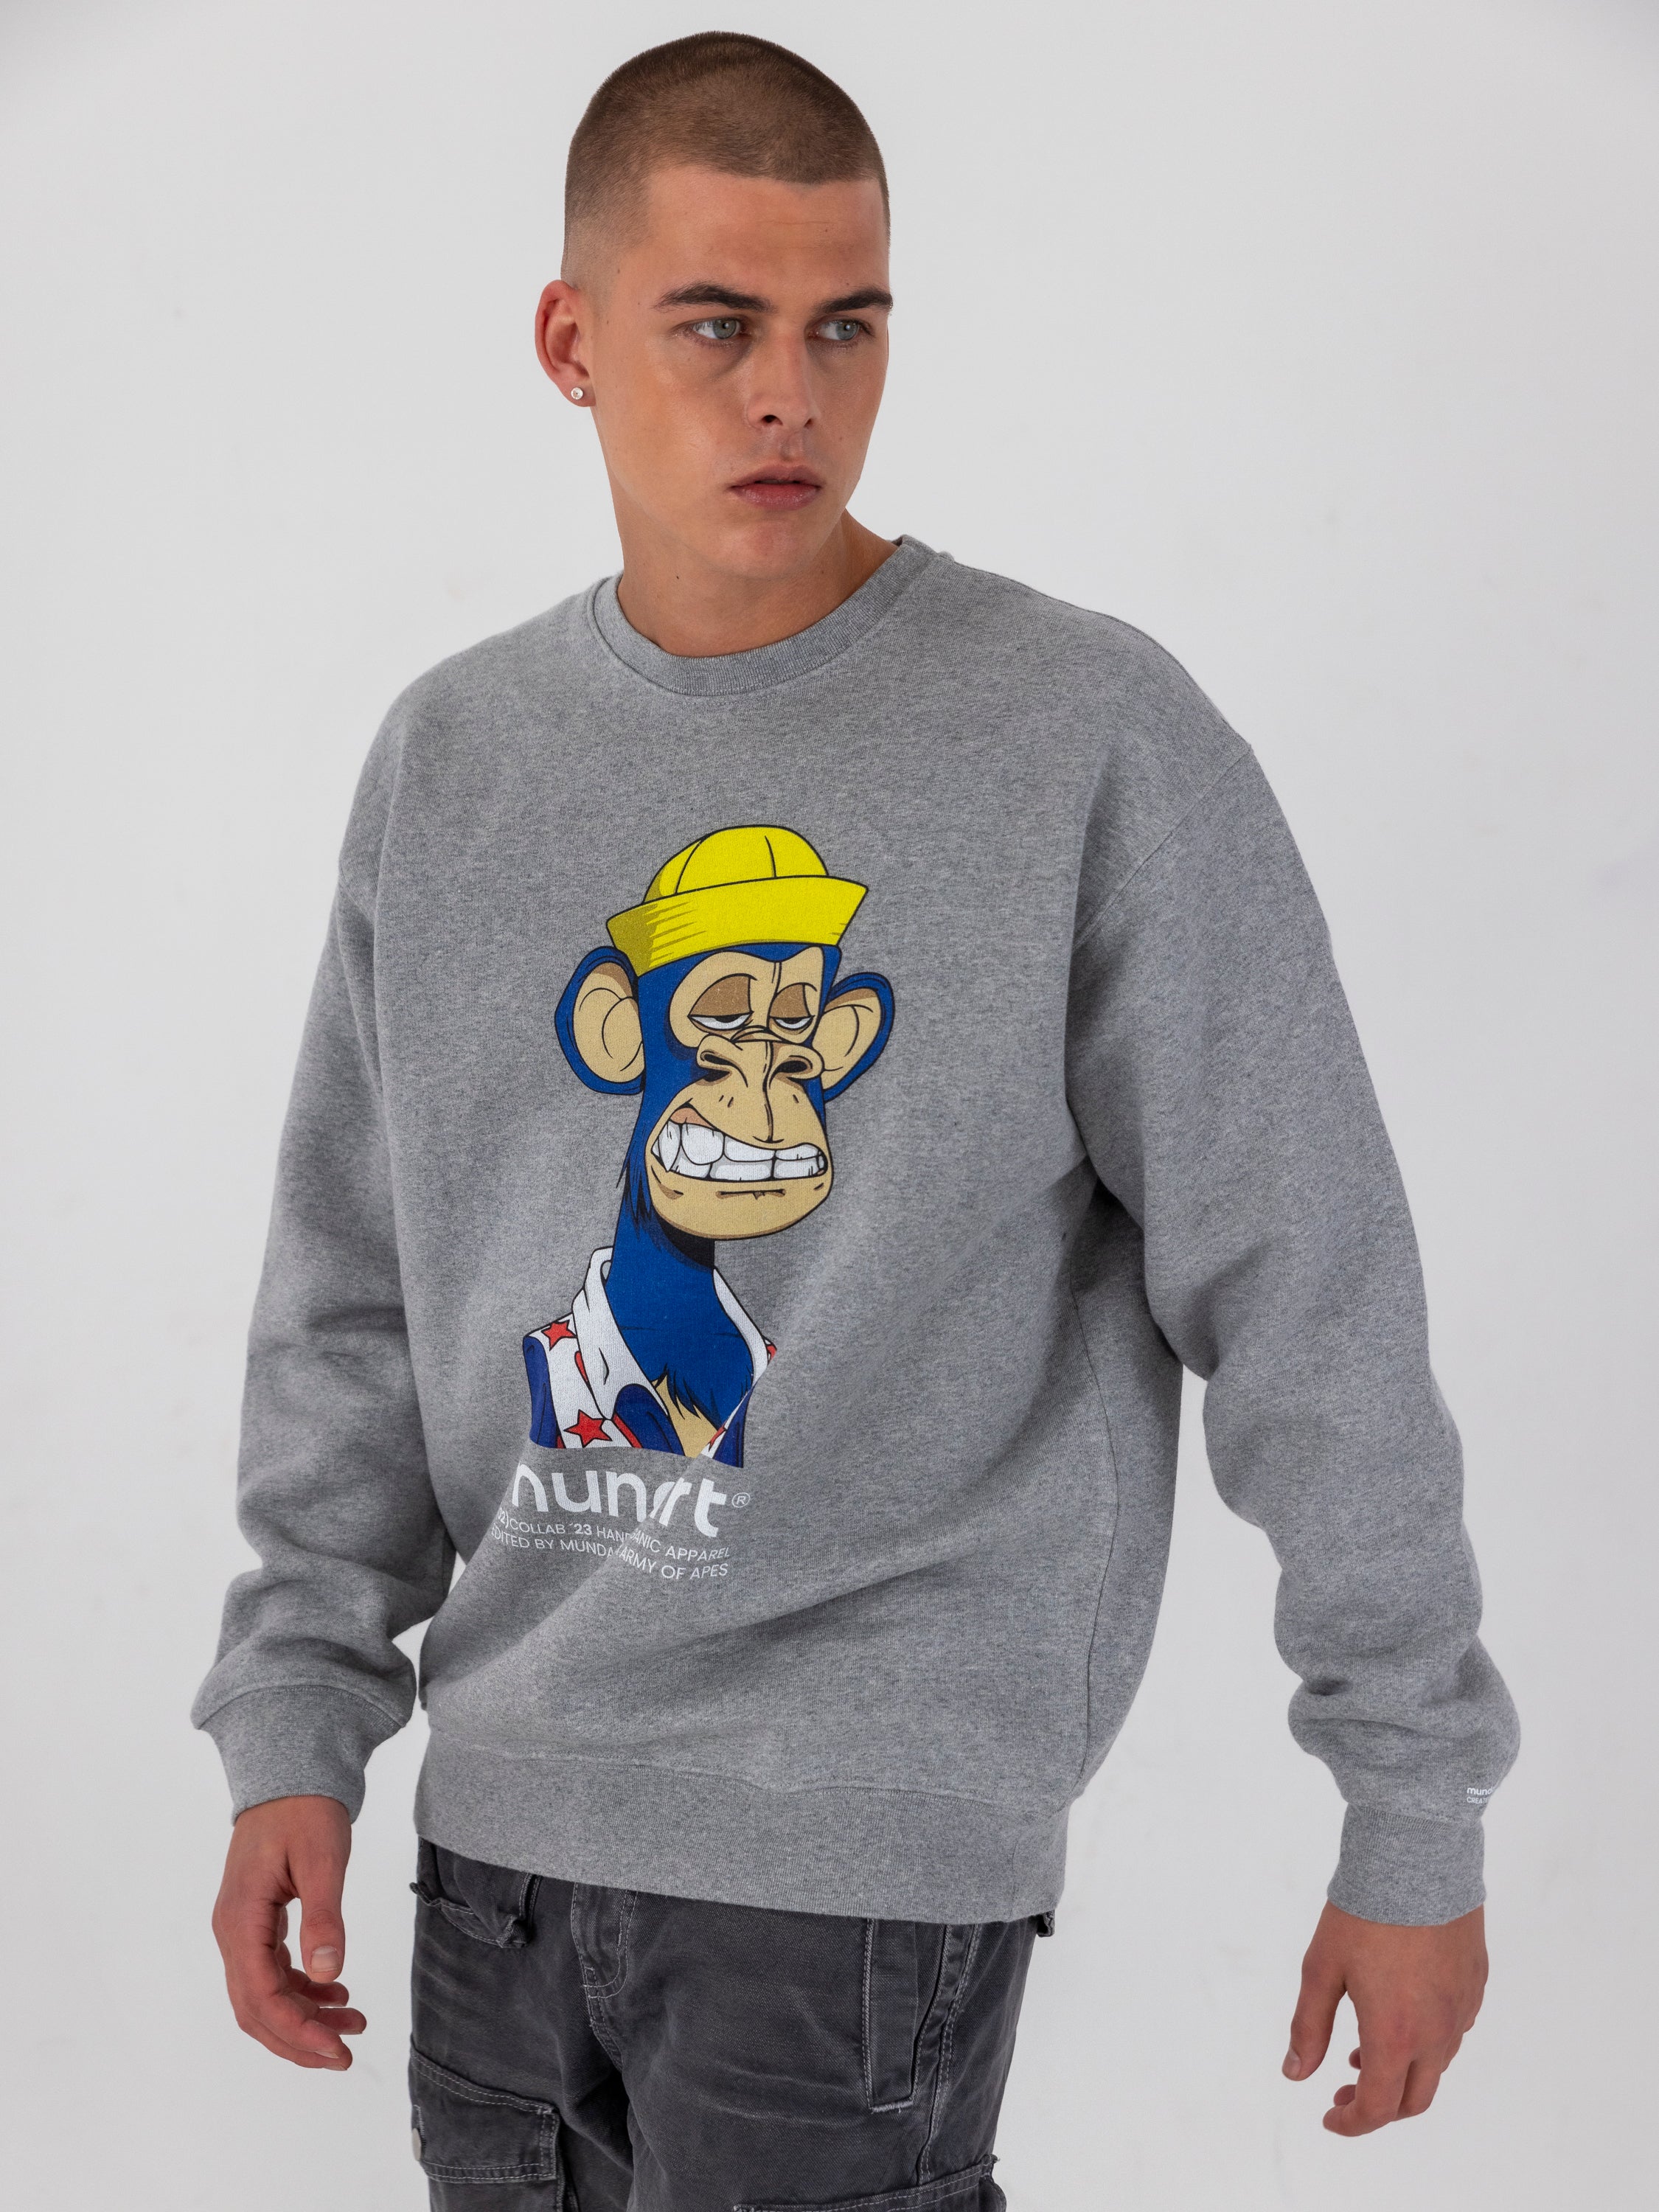 Banda Sweater x Army of Apes Greymelange - made in portugal